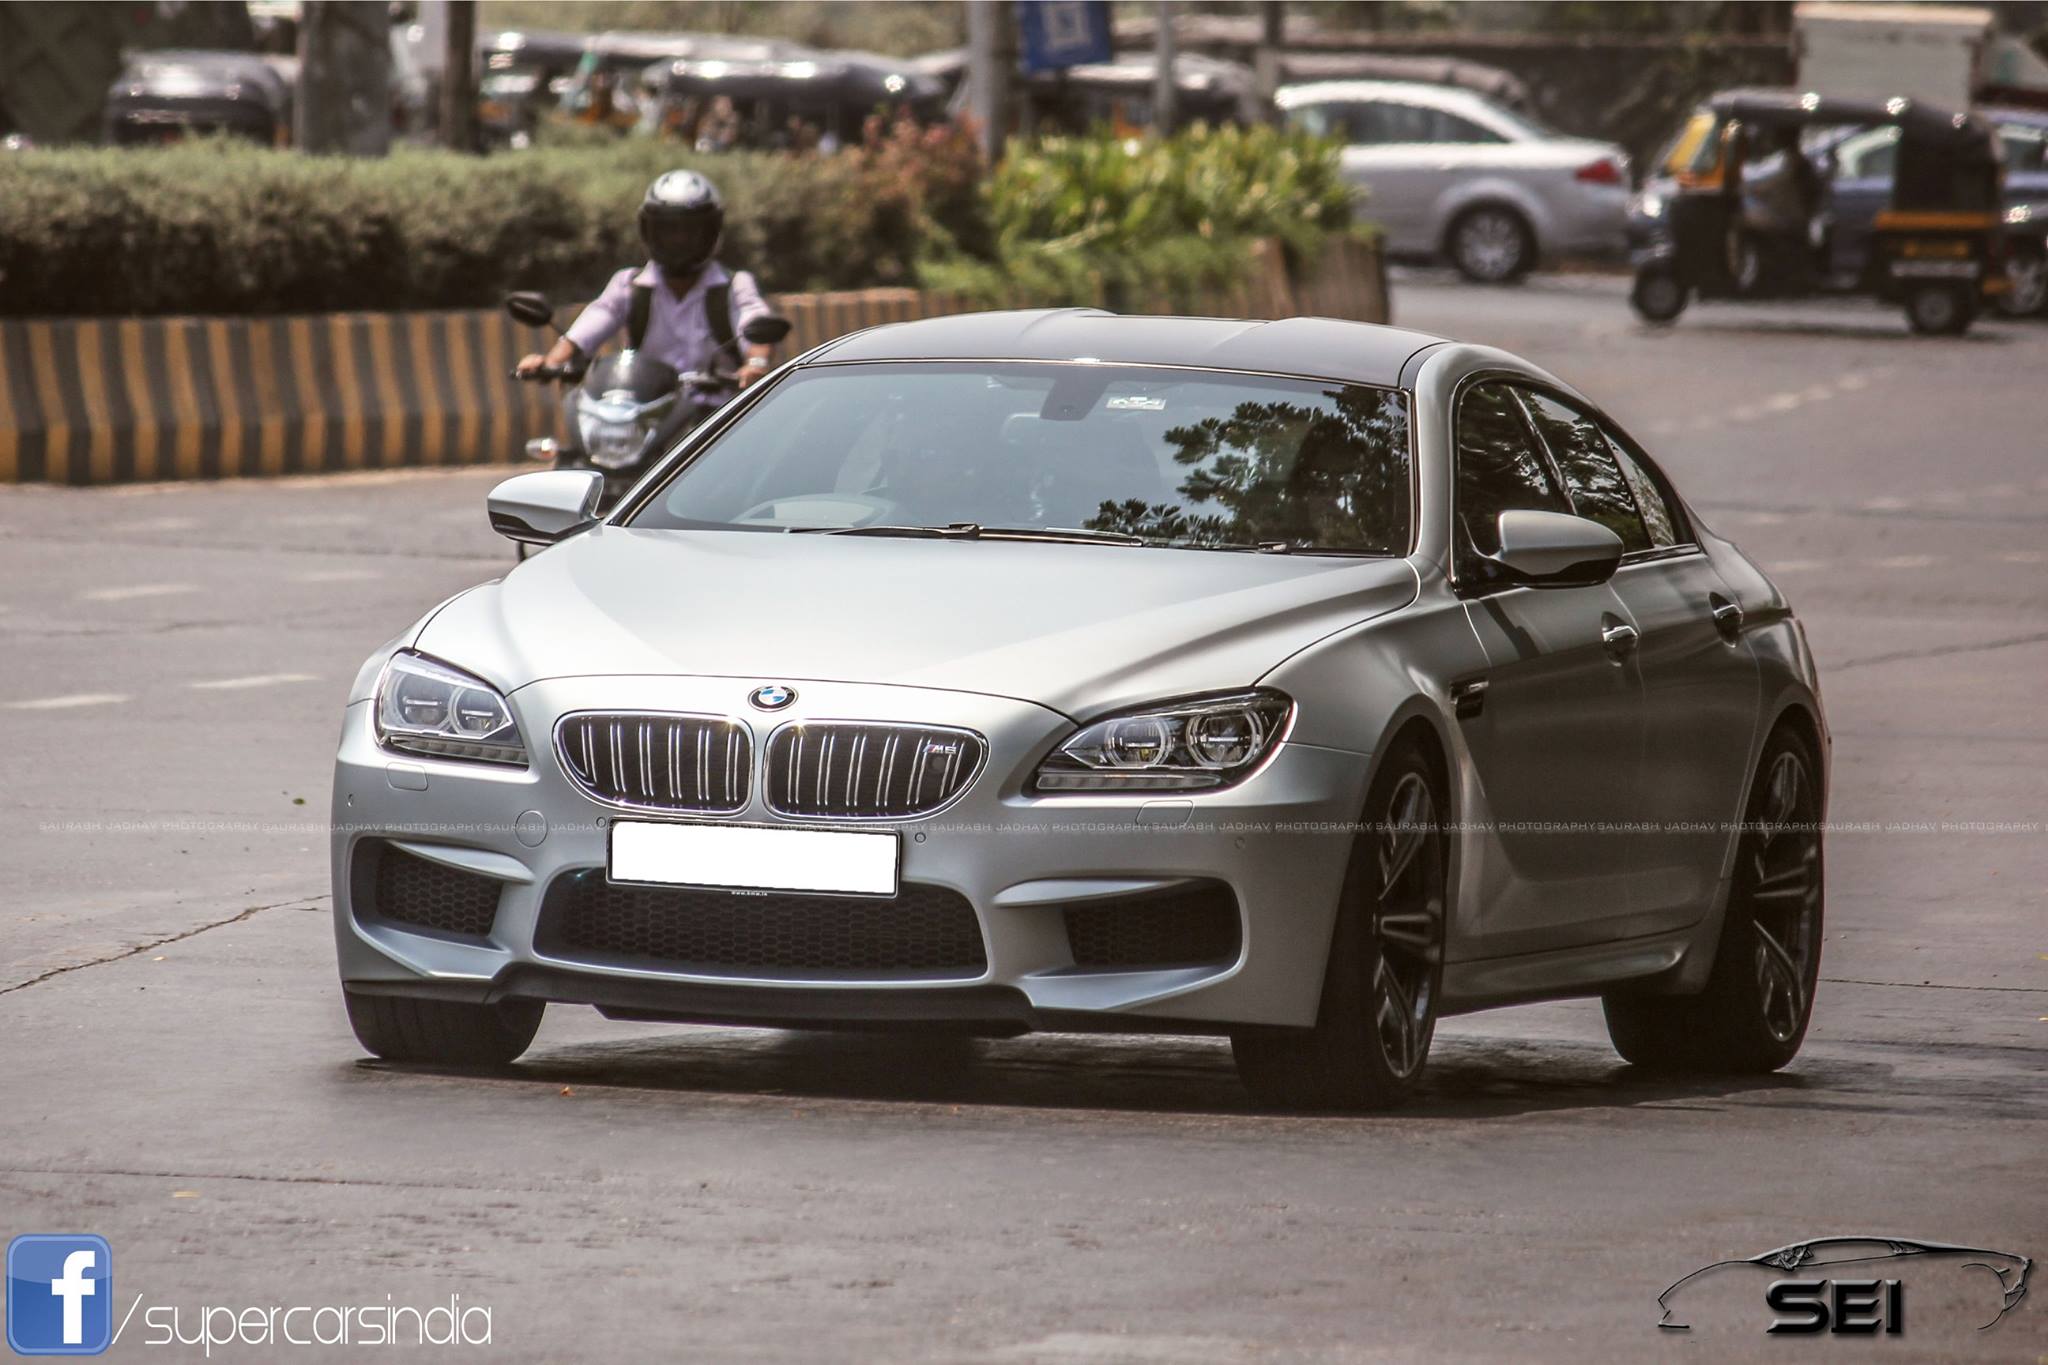 Bmw M6 Gran Coupe Spotted In India Ahead Of Launch This Week